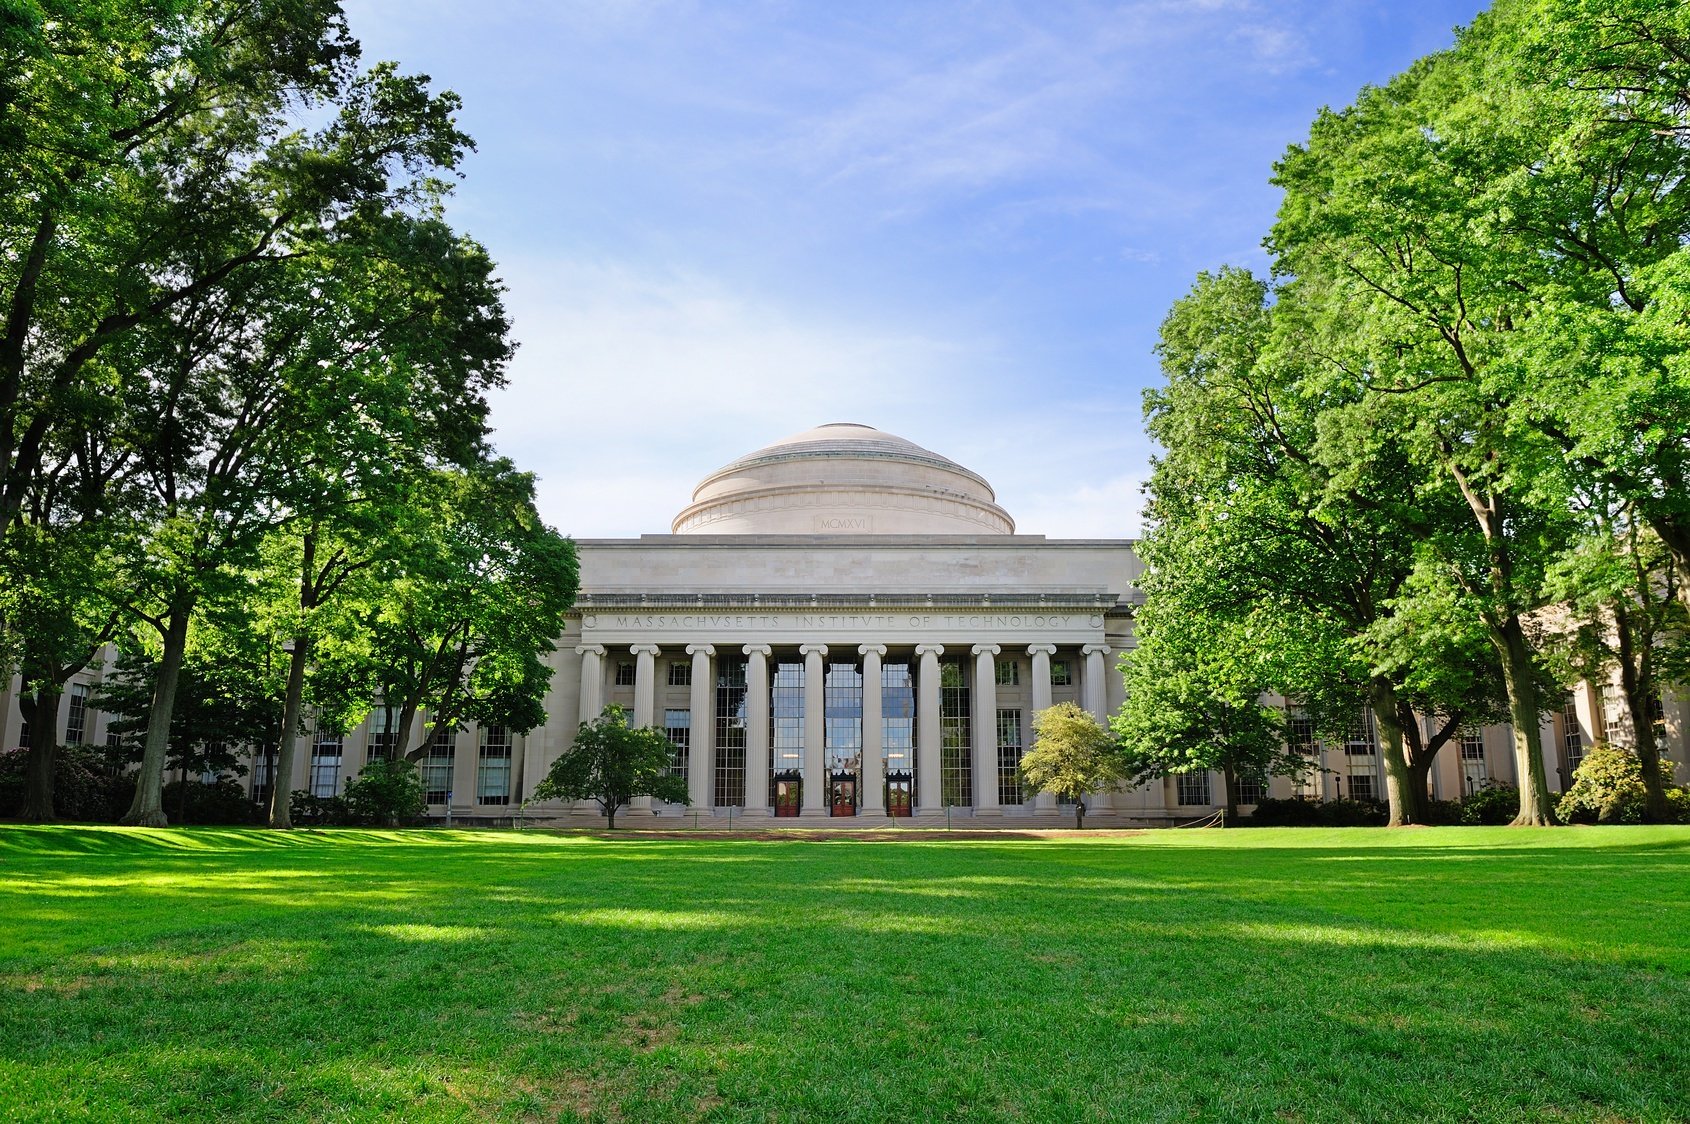 What Is MIT Known For?